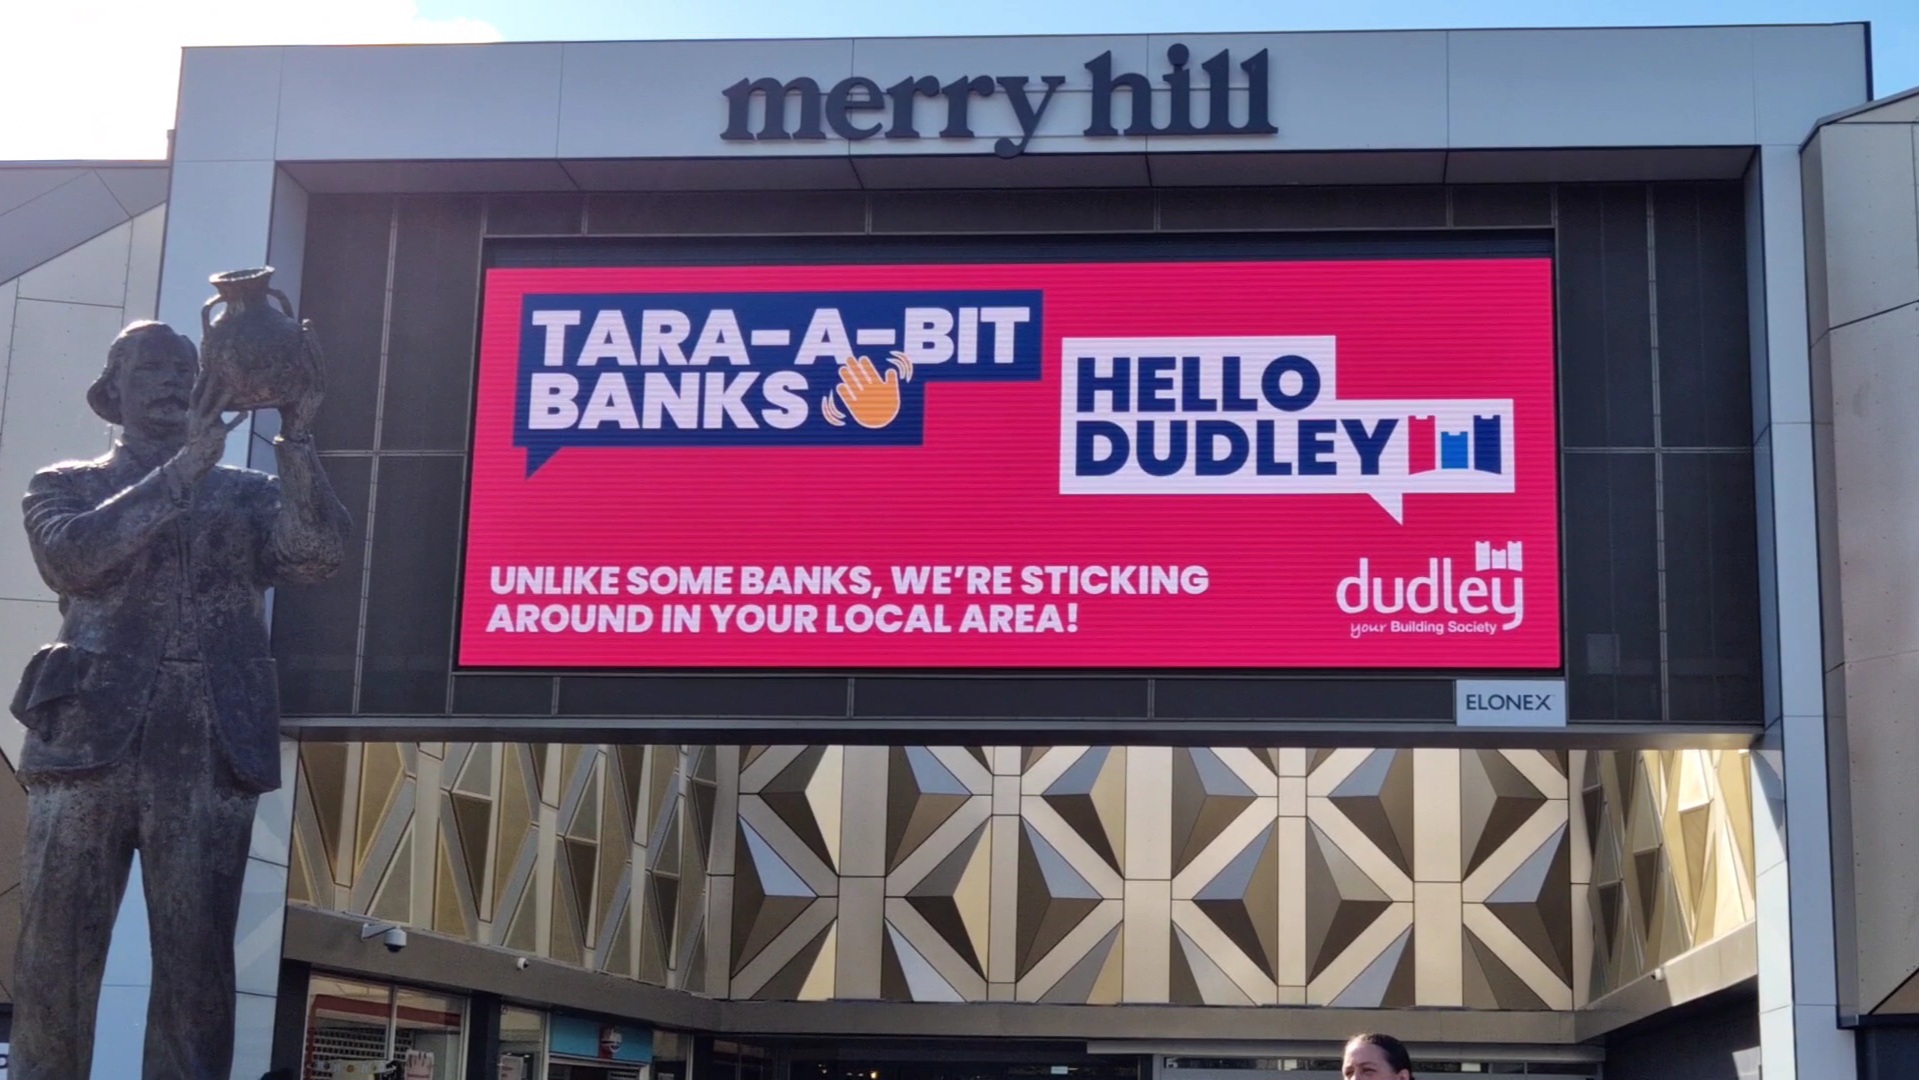 Tara-a-bit banks, hello Dudley! We are committed to staying in your local area